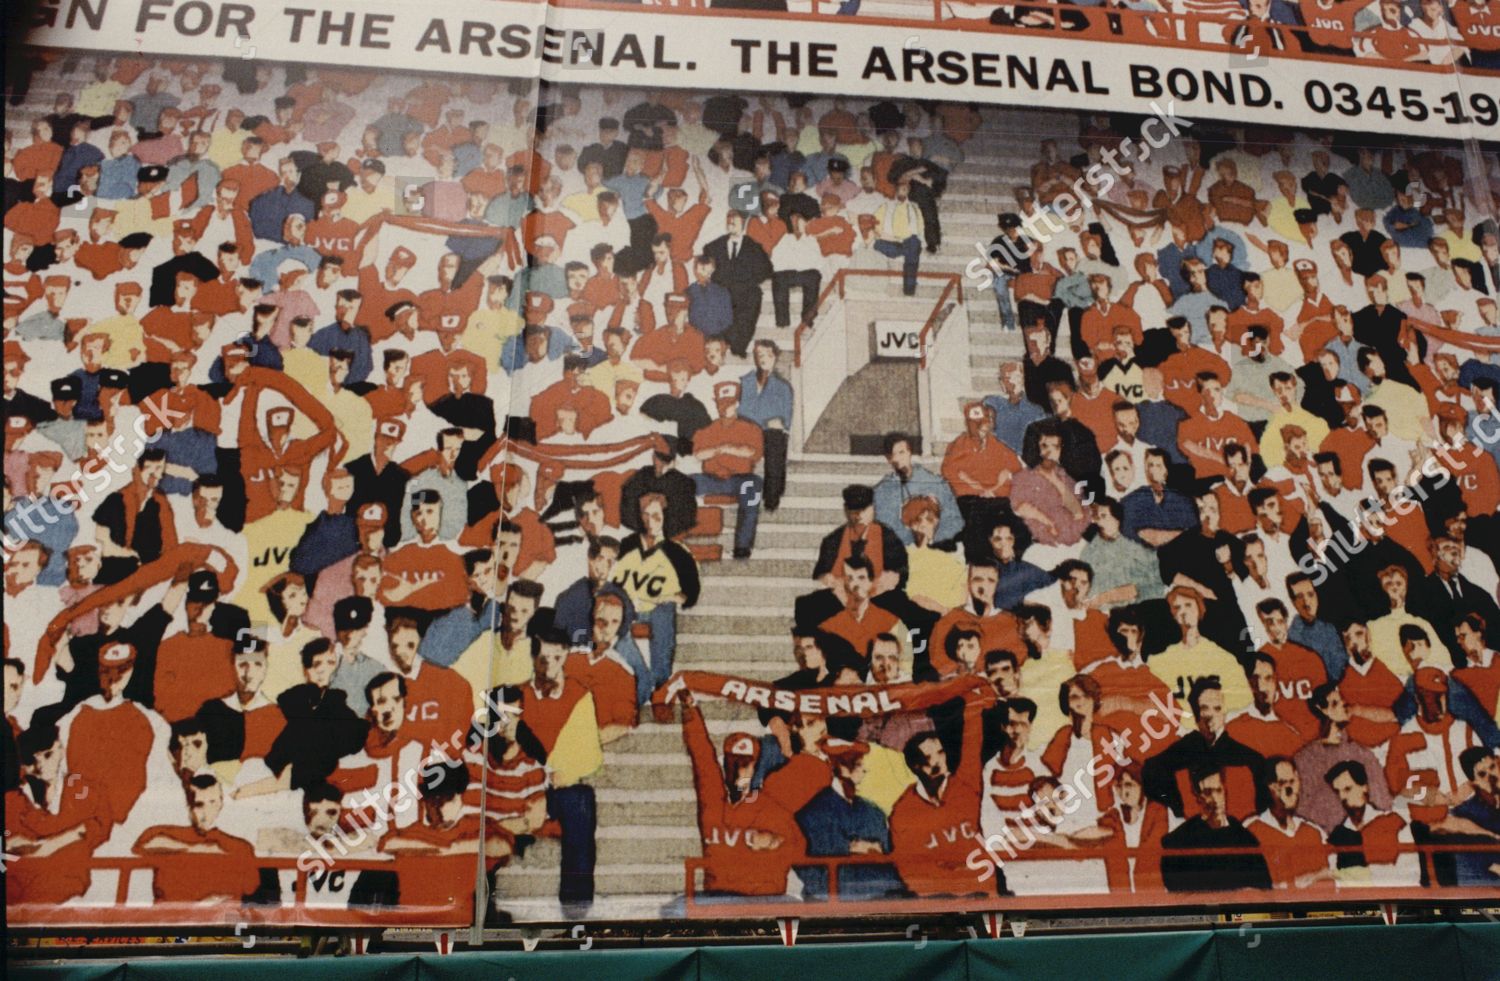 Stock photo of Controversial Mural At Highbury Football Ground. The Mural Designed To Hide Building Work On The North Bank Of The Ground Has Been Criticised For Only Showing White Arsenal Fans.